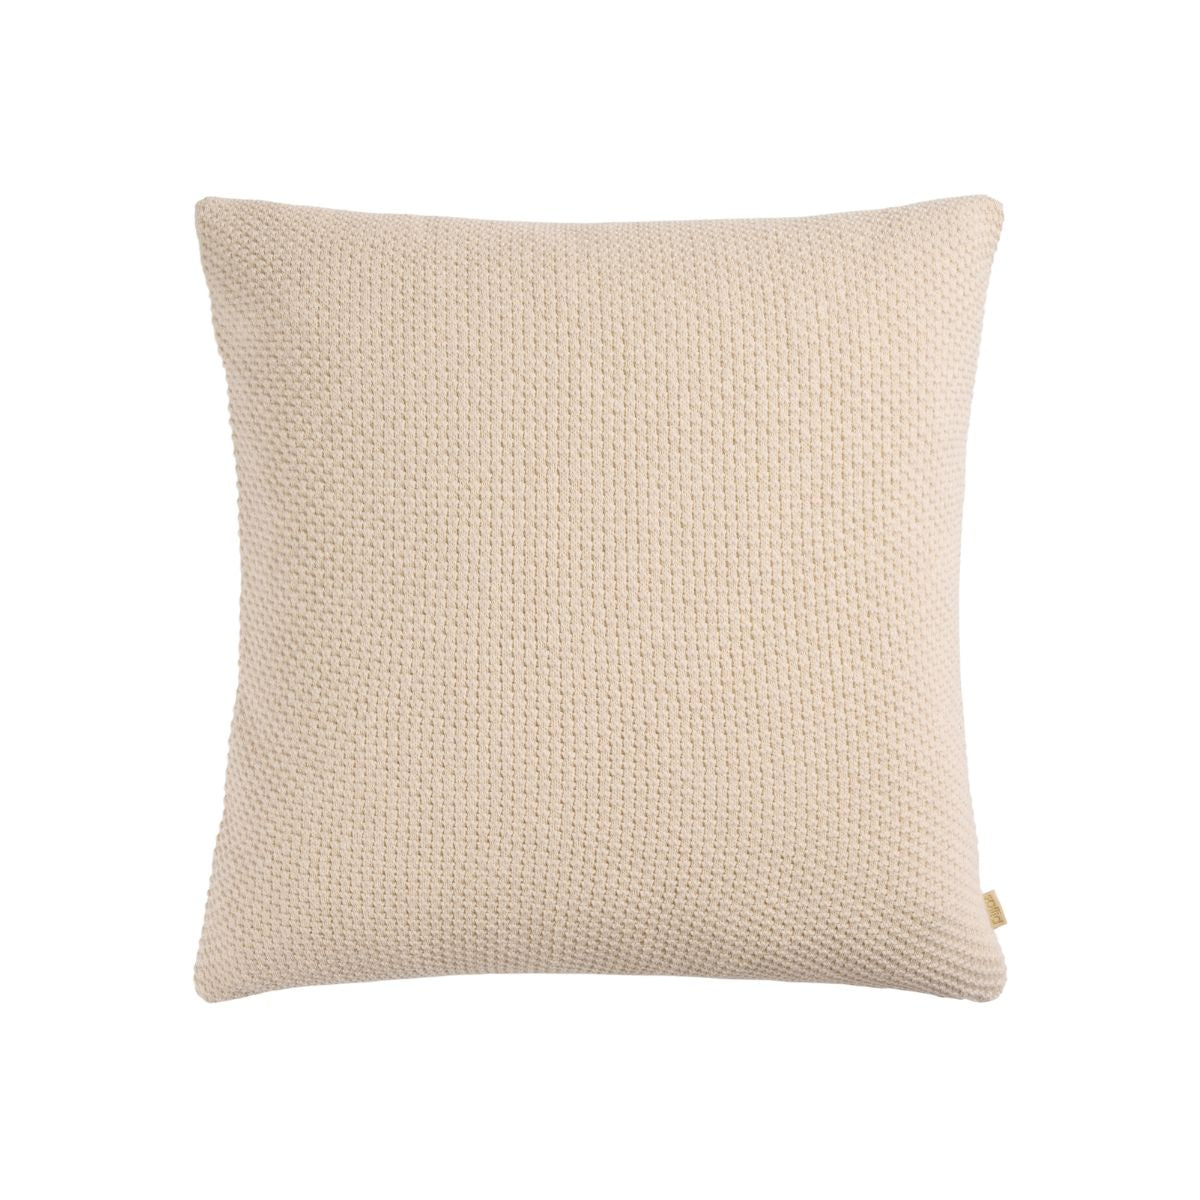 Nora - Ivory colored cushion 